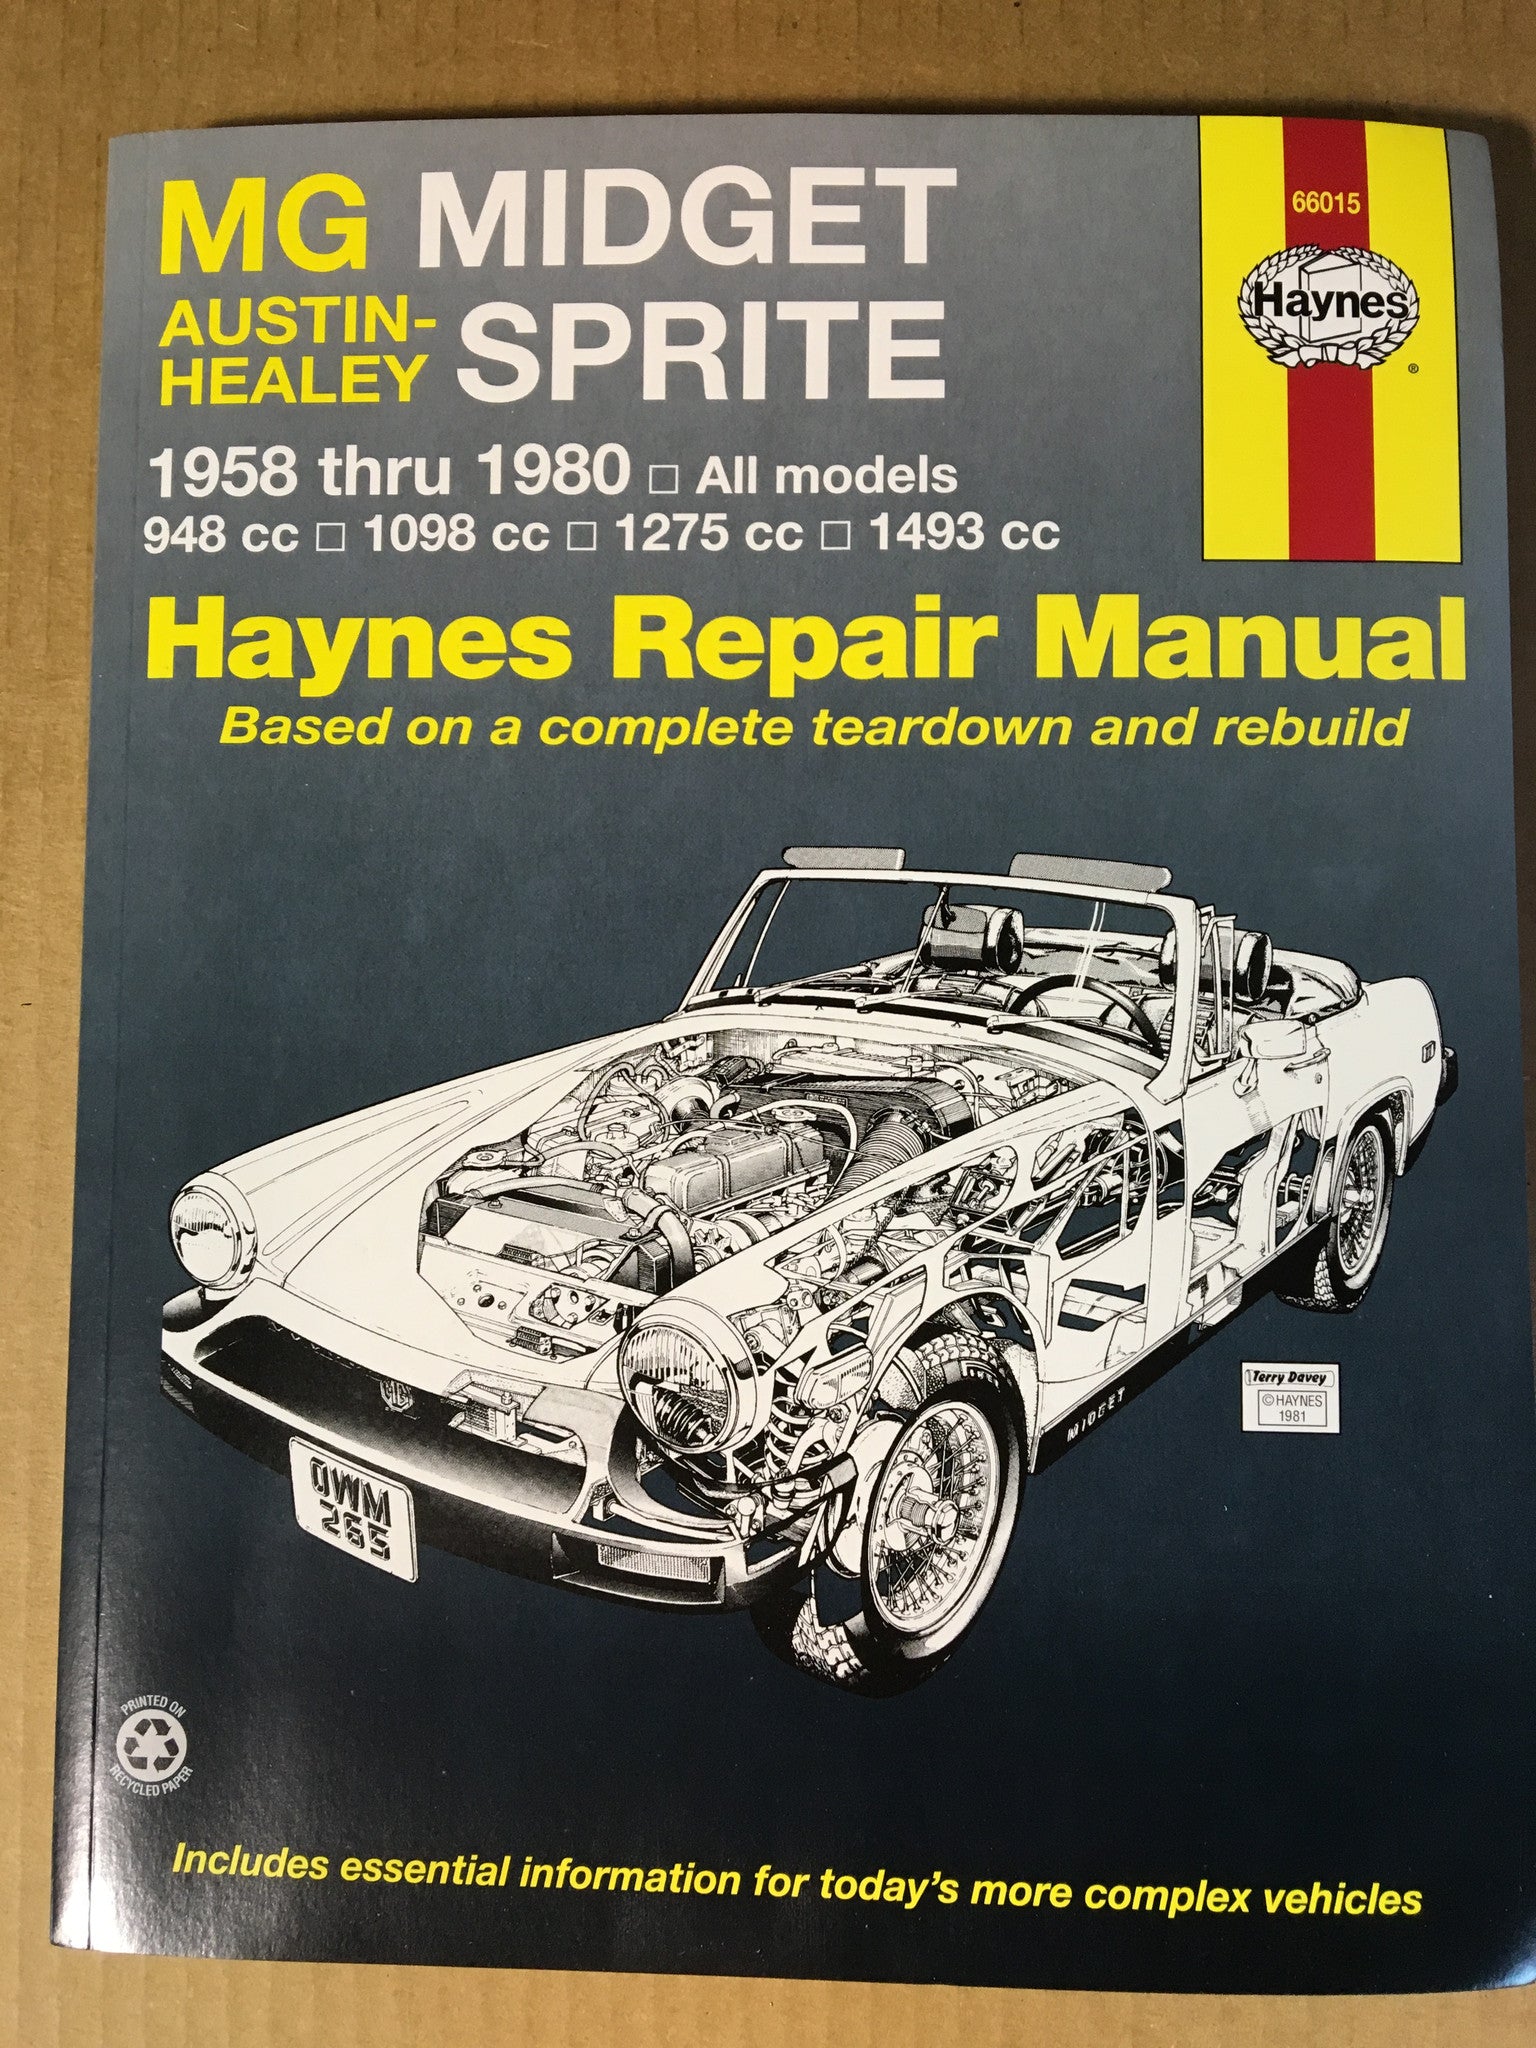 Simple Guide to Engine Oil Filters - Haynes Manuals